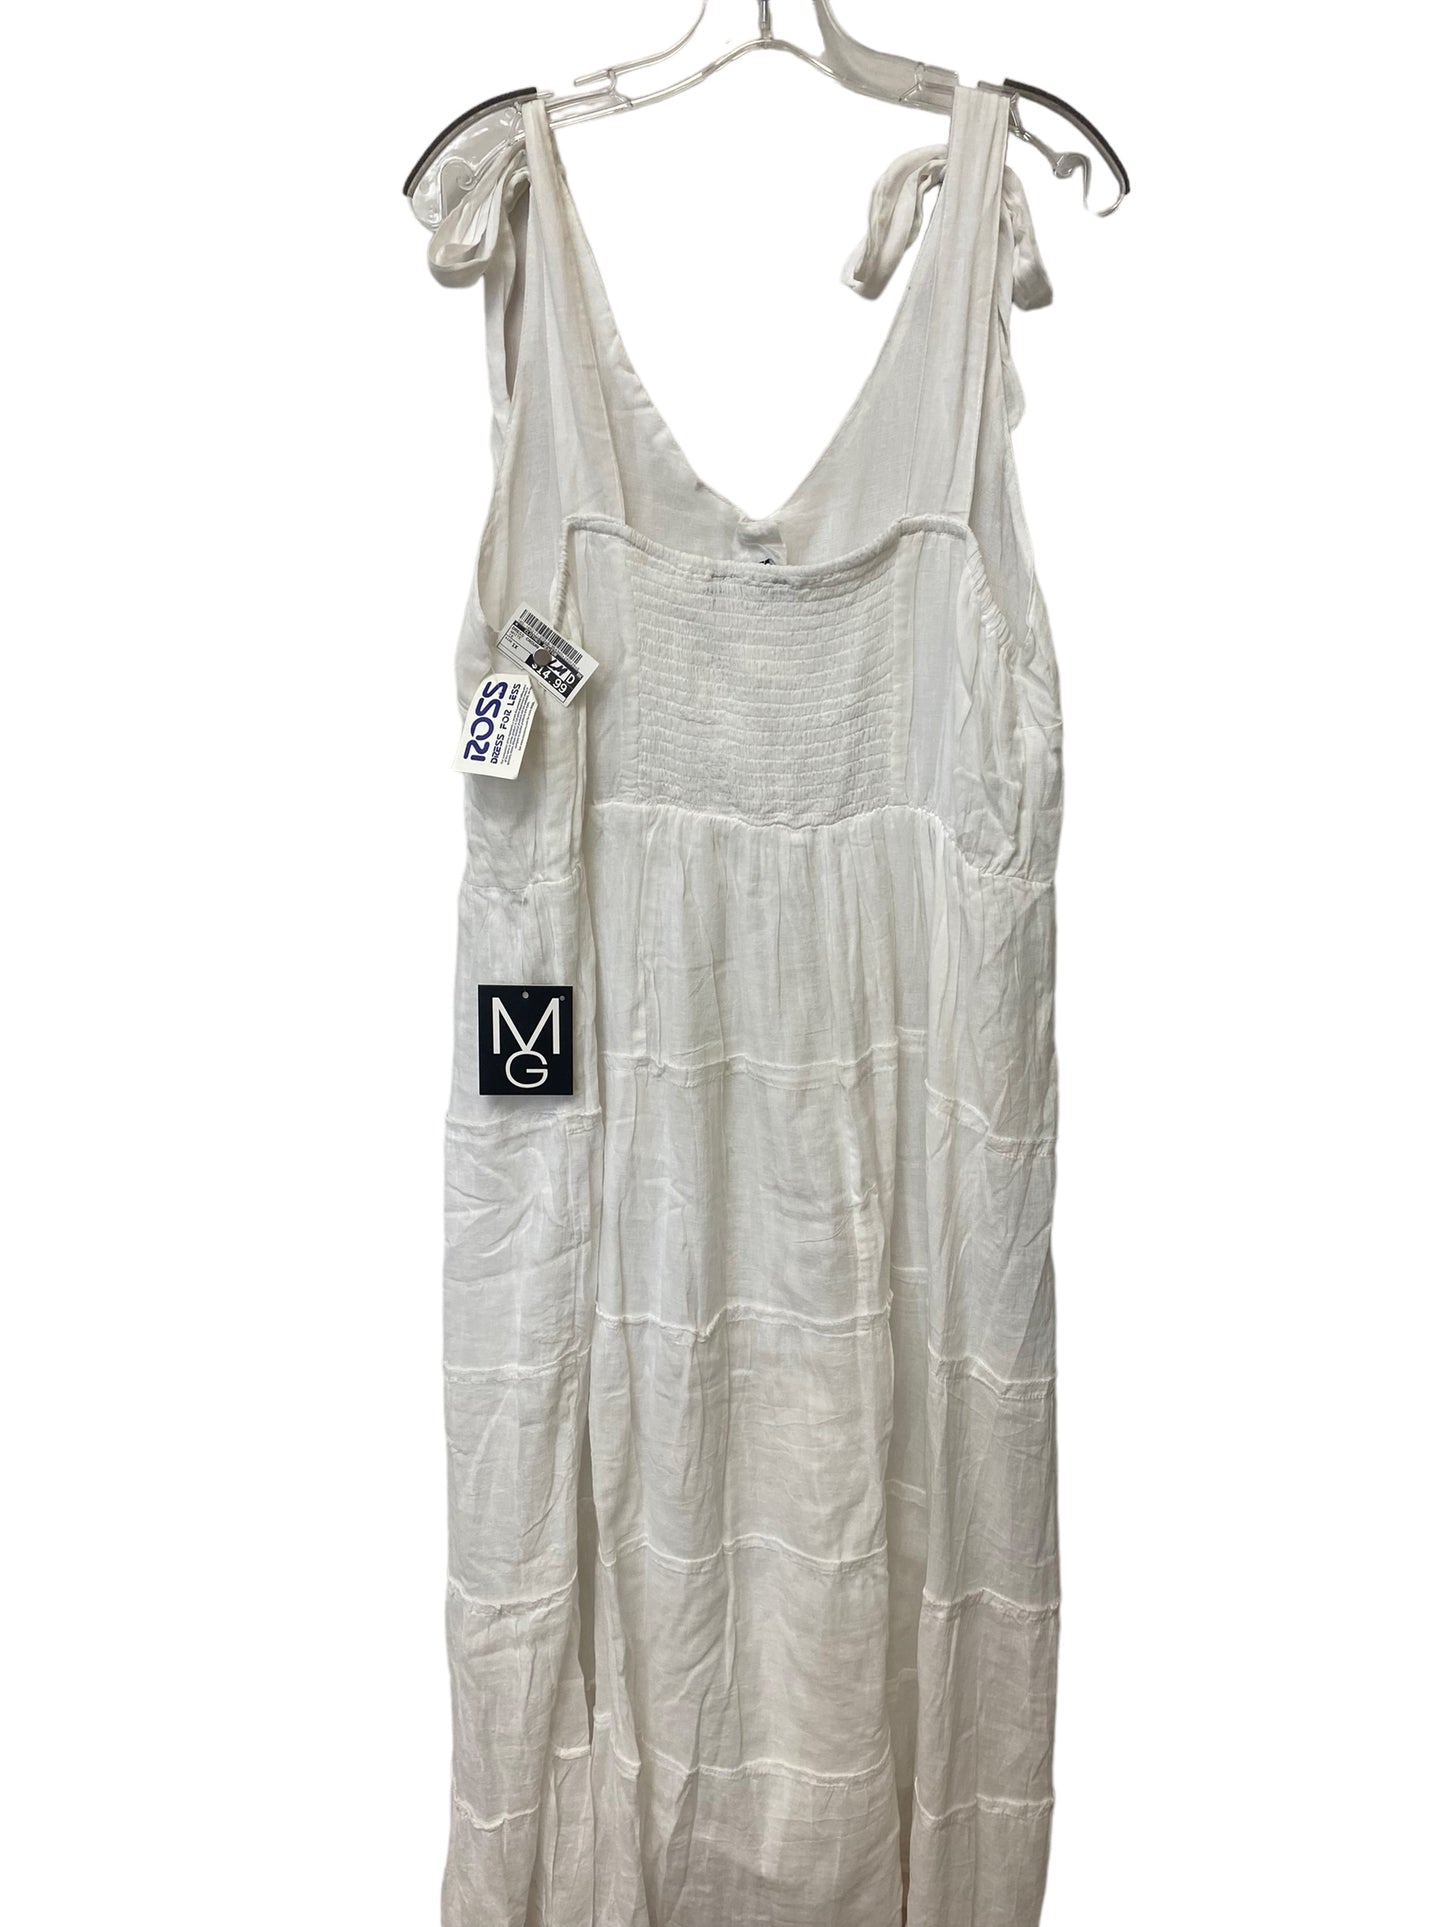 Dress Casual Maxi By Clothes Mentor  Size: 1x